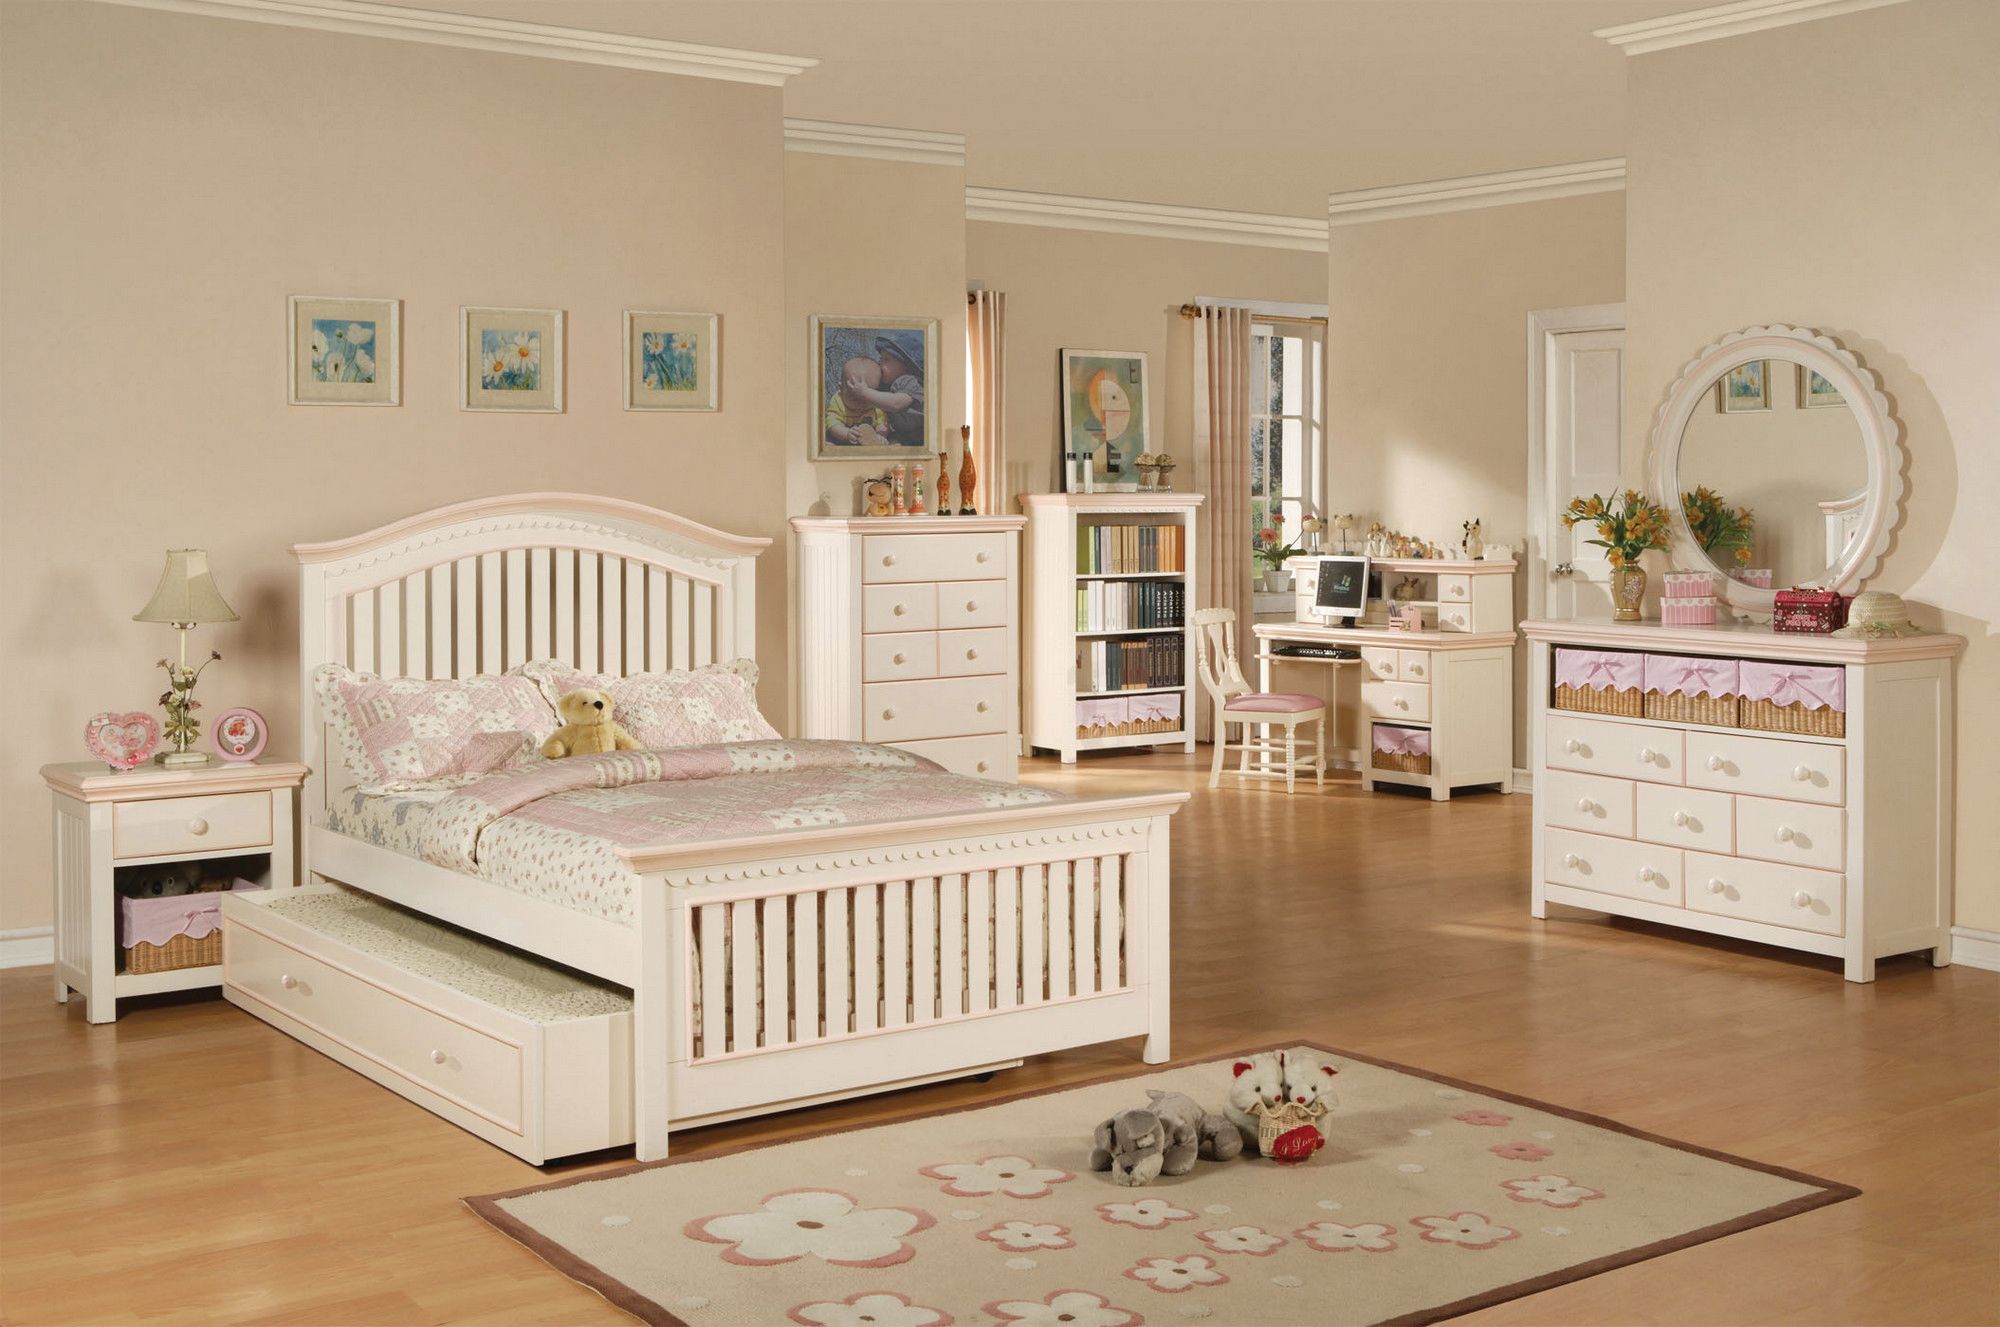 FULL SIZE BEDROOM SET YOUTH FLORESVILLE PINK 5 PIECE COLLECTION